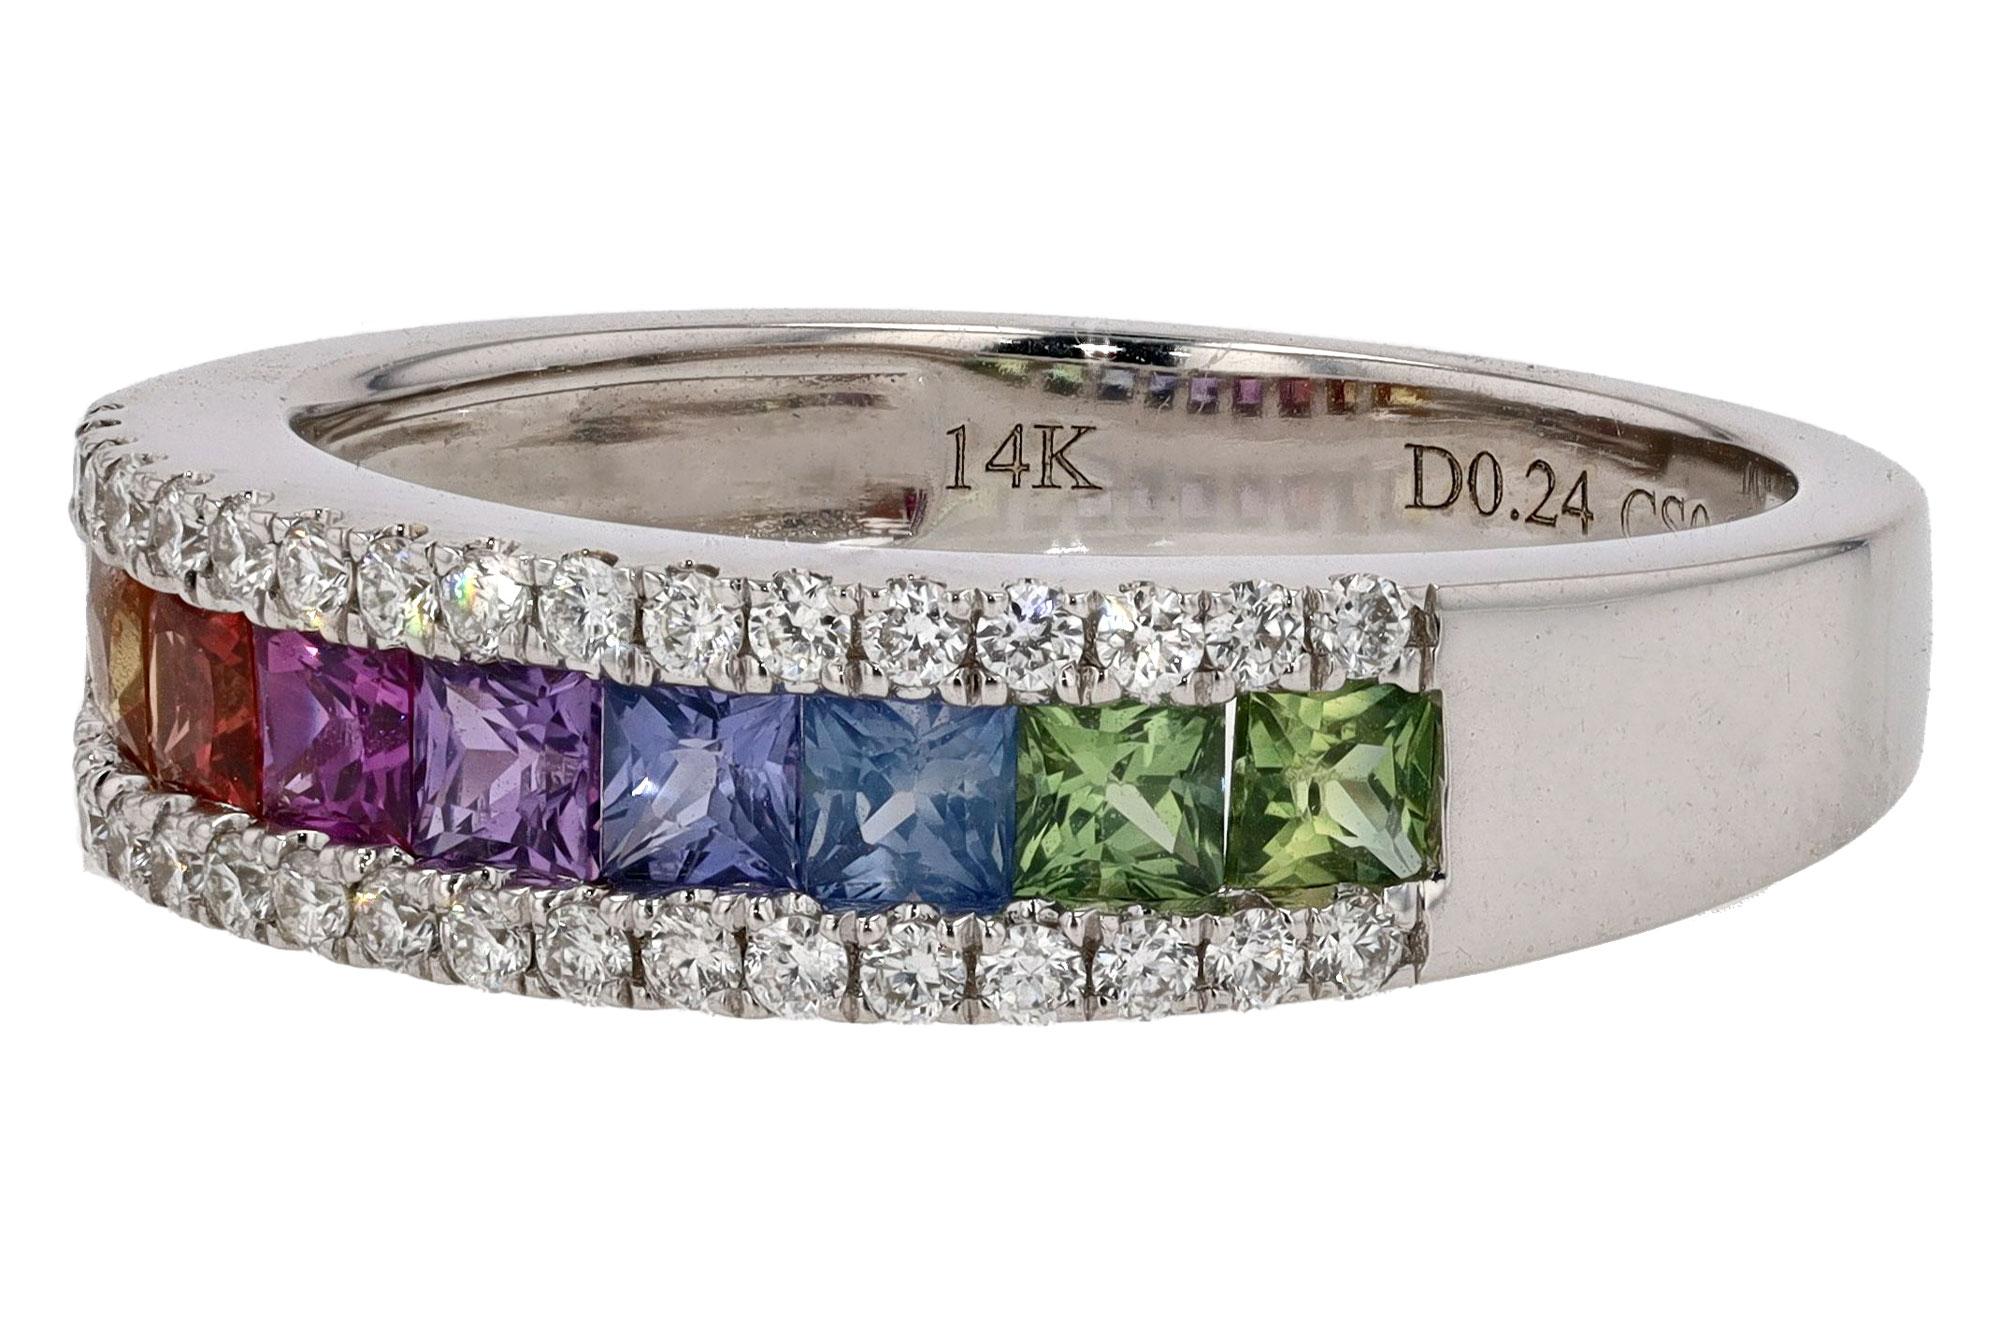 This sleek wedding band features a lovely rainbow of multi colored sapphires ranging from an earthy green that streams fluently to a golden yellow color. The gemstones are fenced with rows of diamonds amongst the gleaming 14k white gold setting.